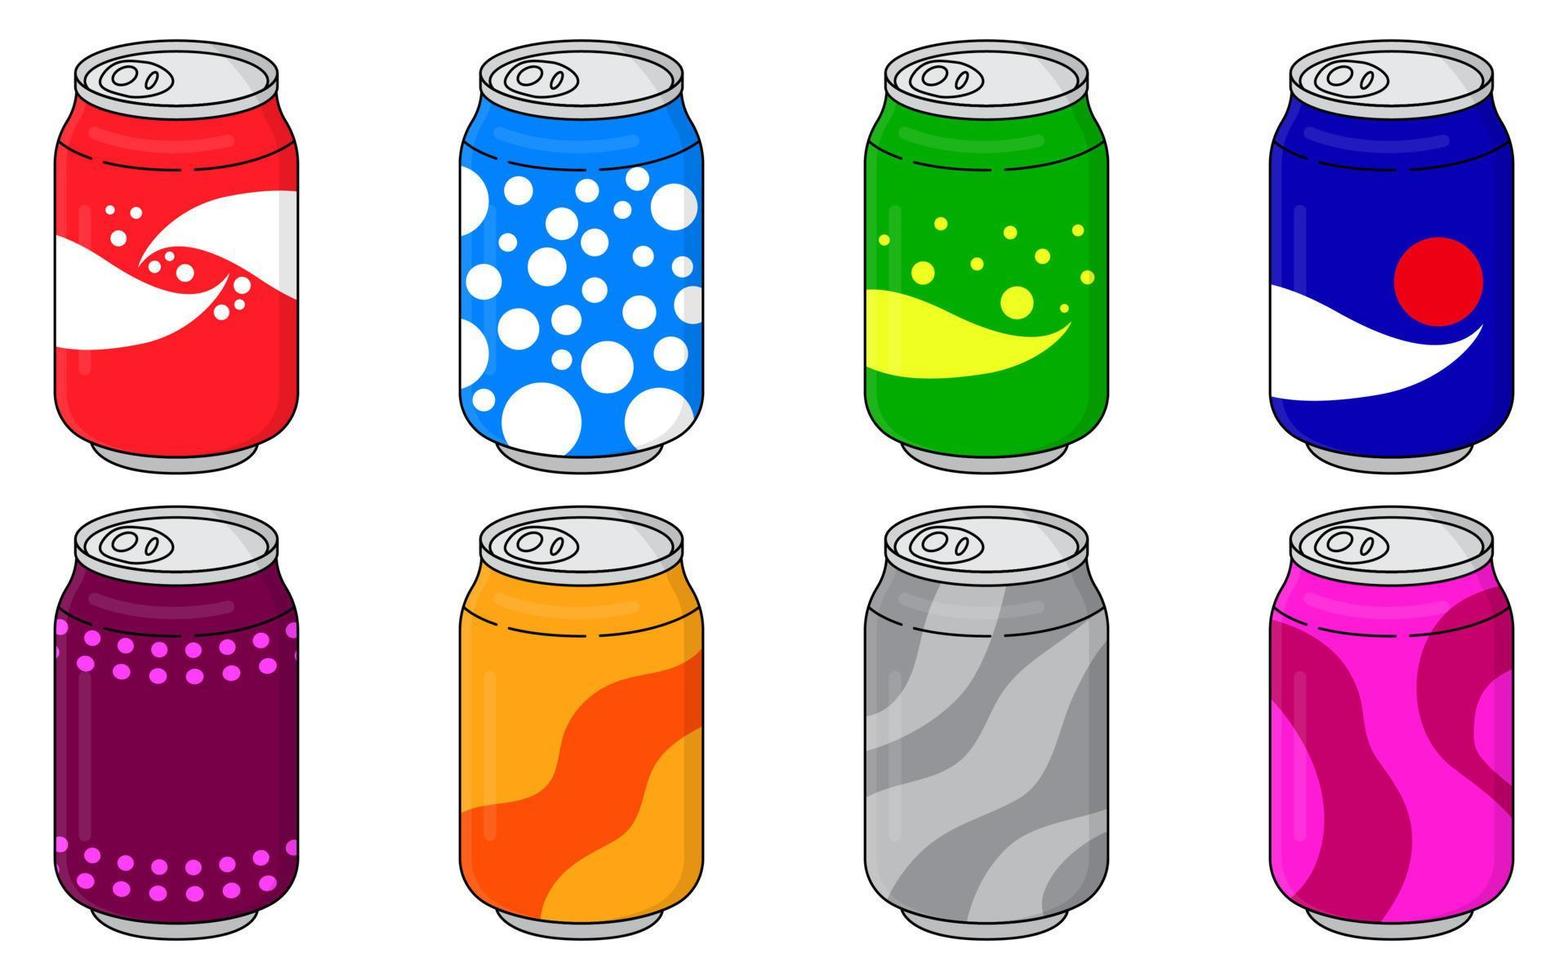 Soda in colored aluminum cans set icons isolated on white background. Soft drinks sign. Carbonated non-alcoholic water with different flavors. Drinks in colored packaging. Vector illustration